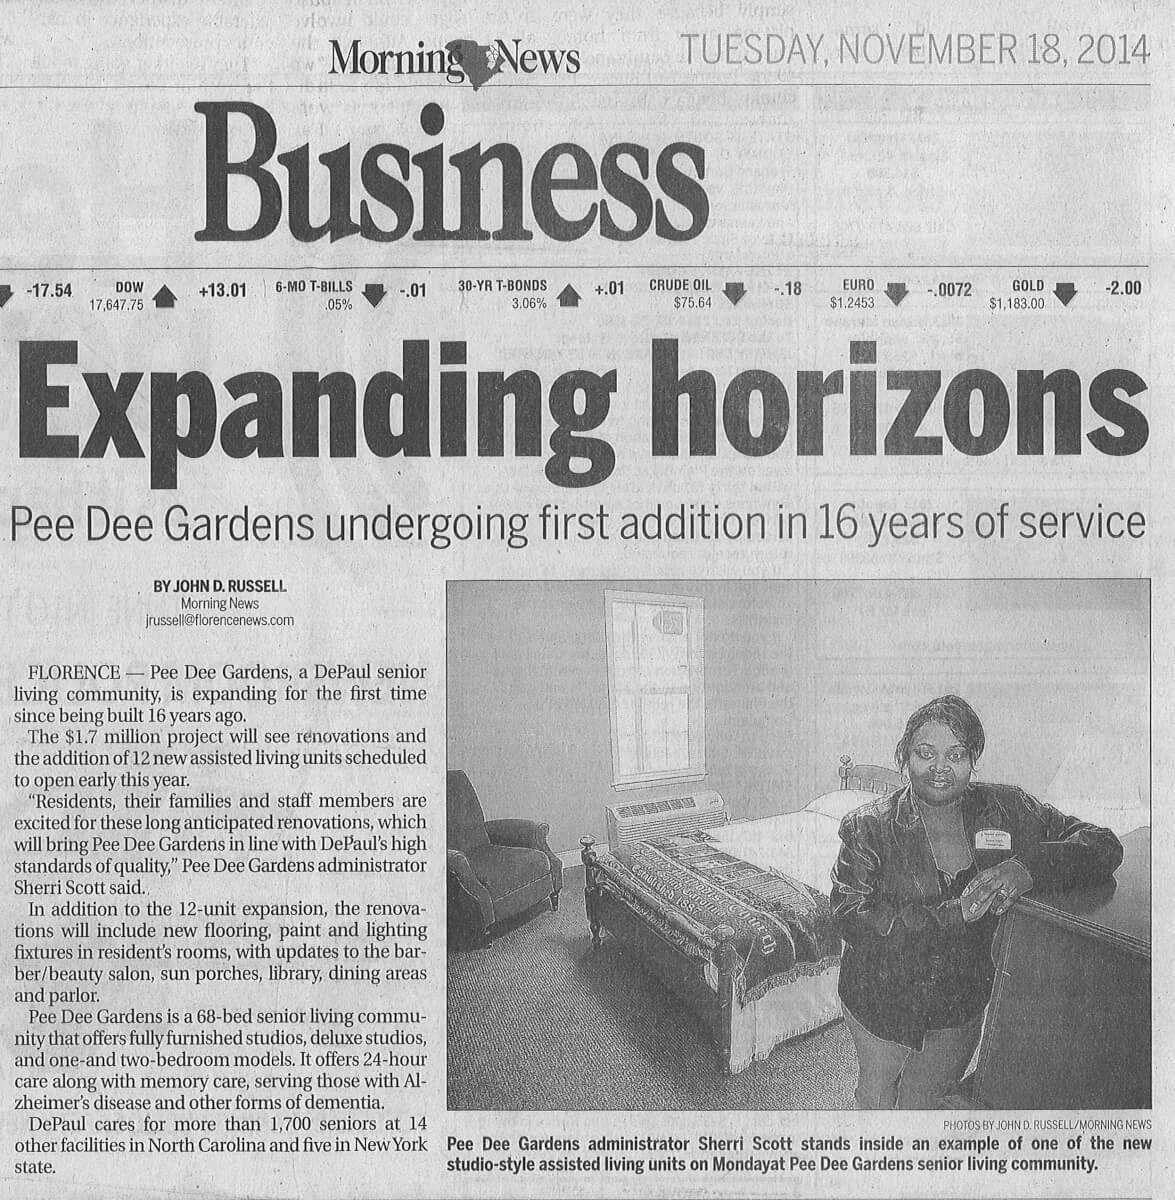 Pee Dee Gardens expansion article in the Morning News November 18, 2014